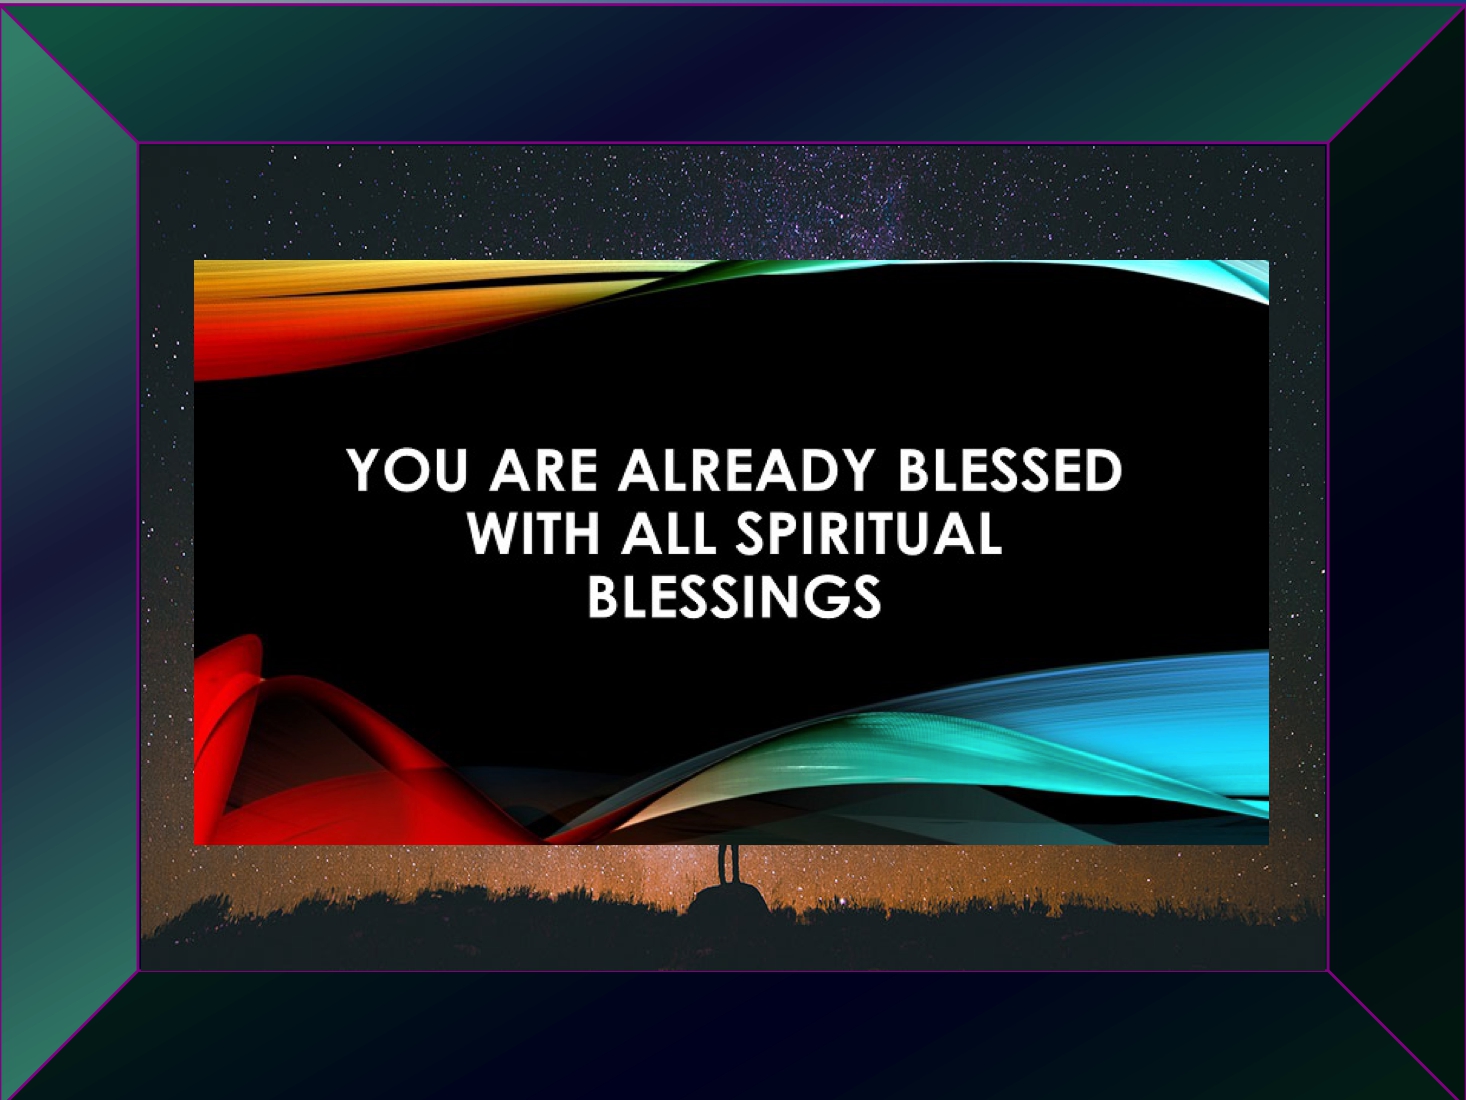 MORE VIDEOS - PRACTICAL SPIRITUALLY Is Iiving a Spiritually Centered Life, through Love, Wisdom and Action to improve our community on a local, regional and global level. And always we work for the Common Good